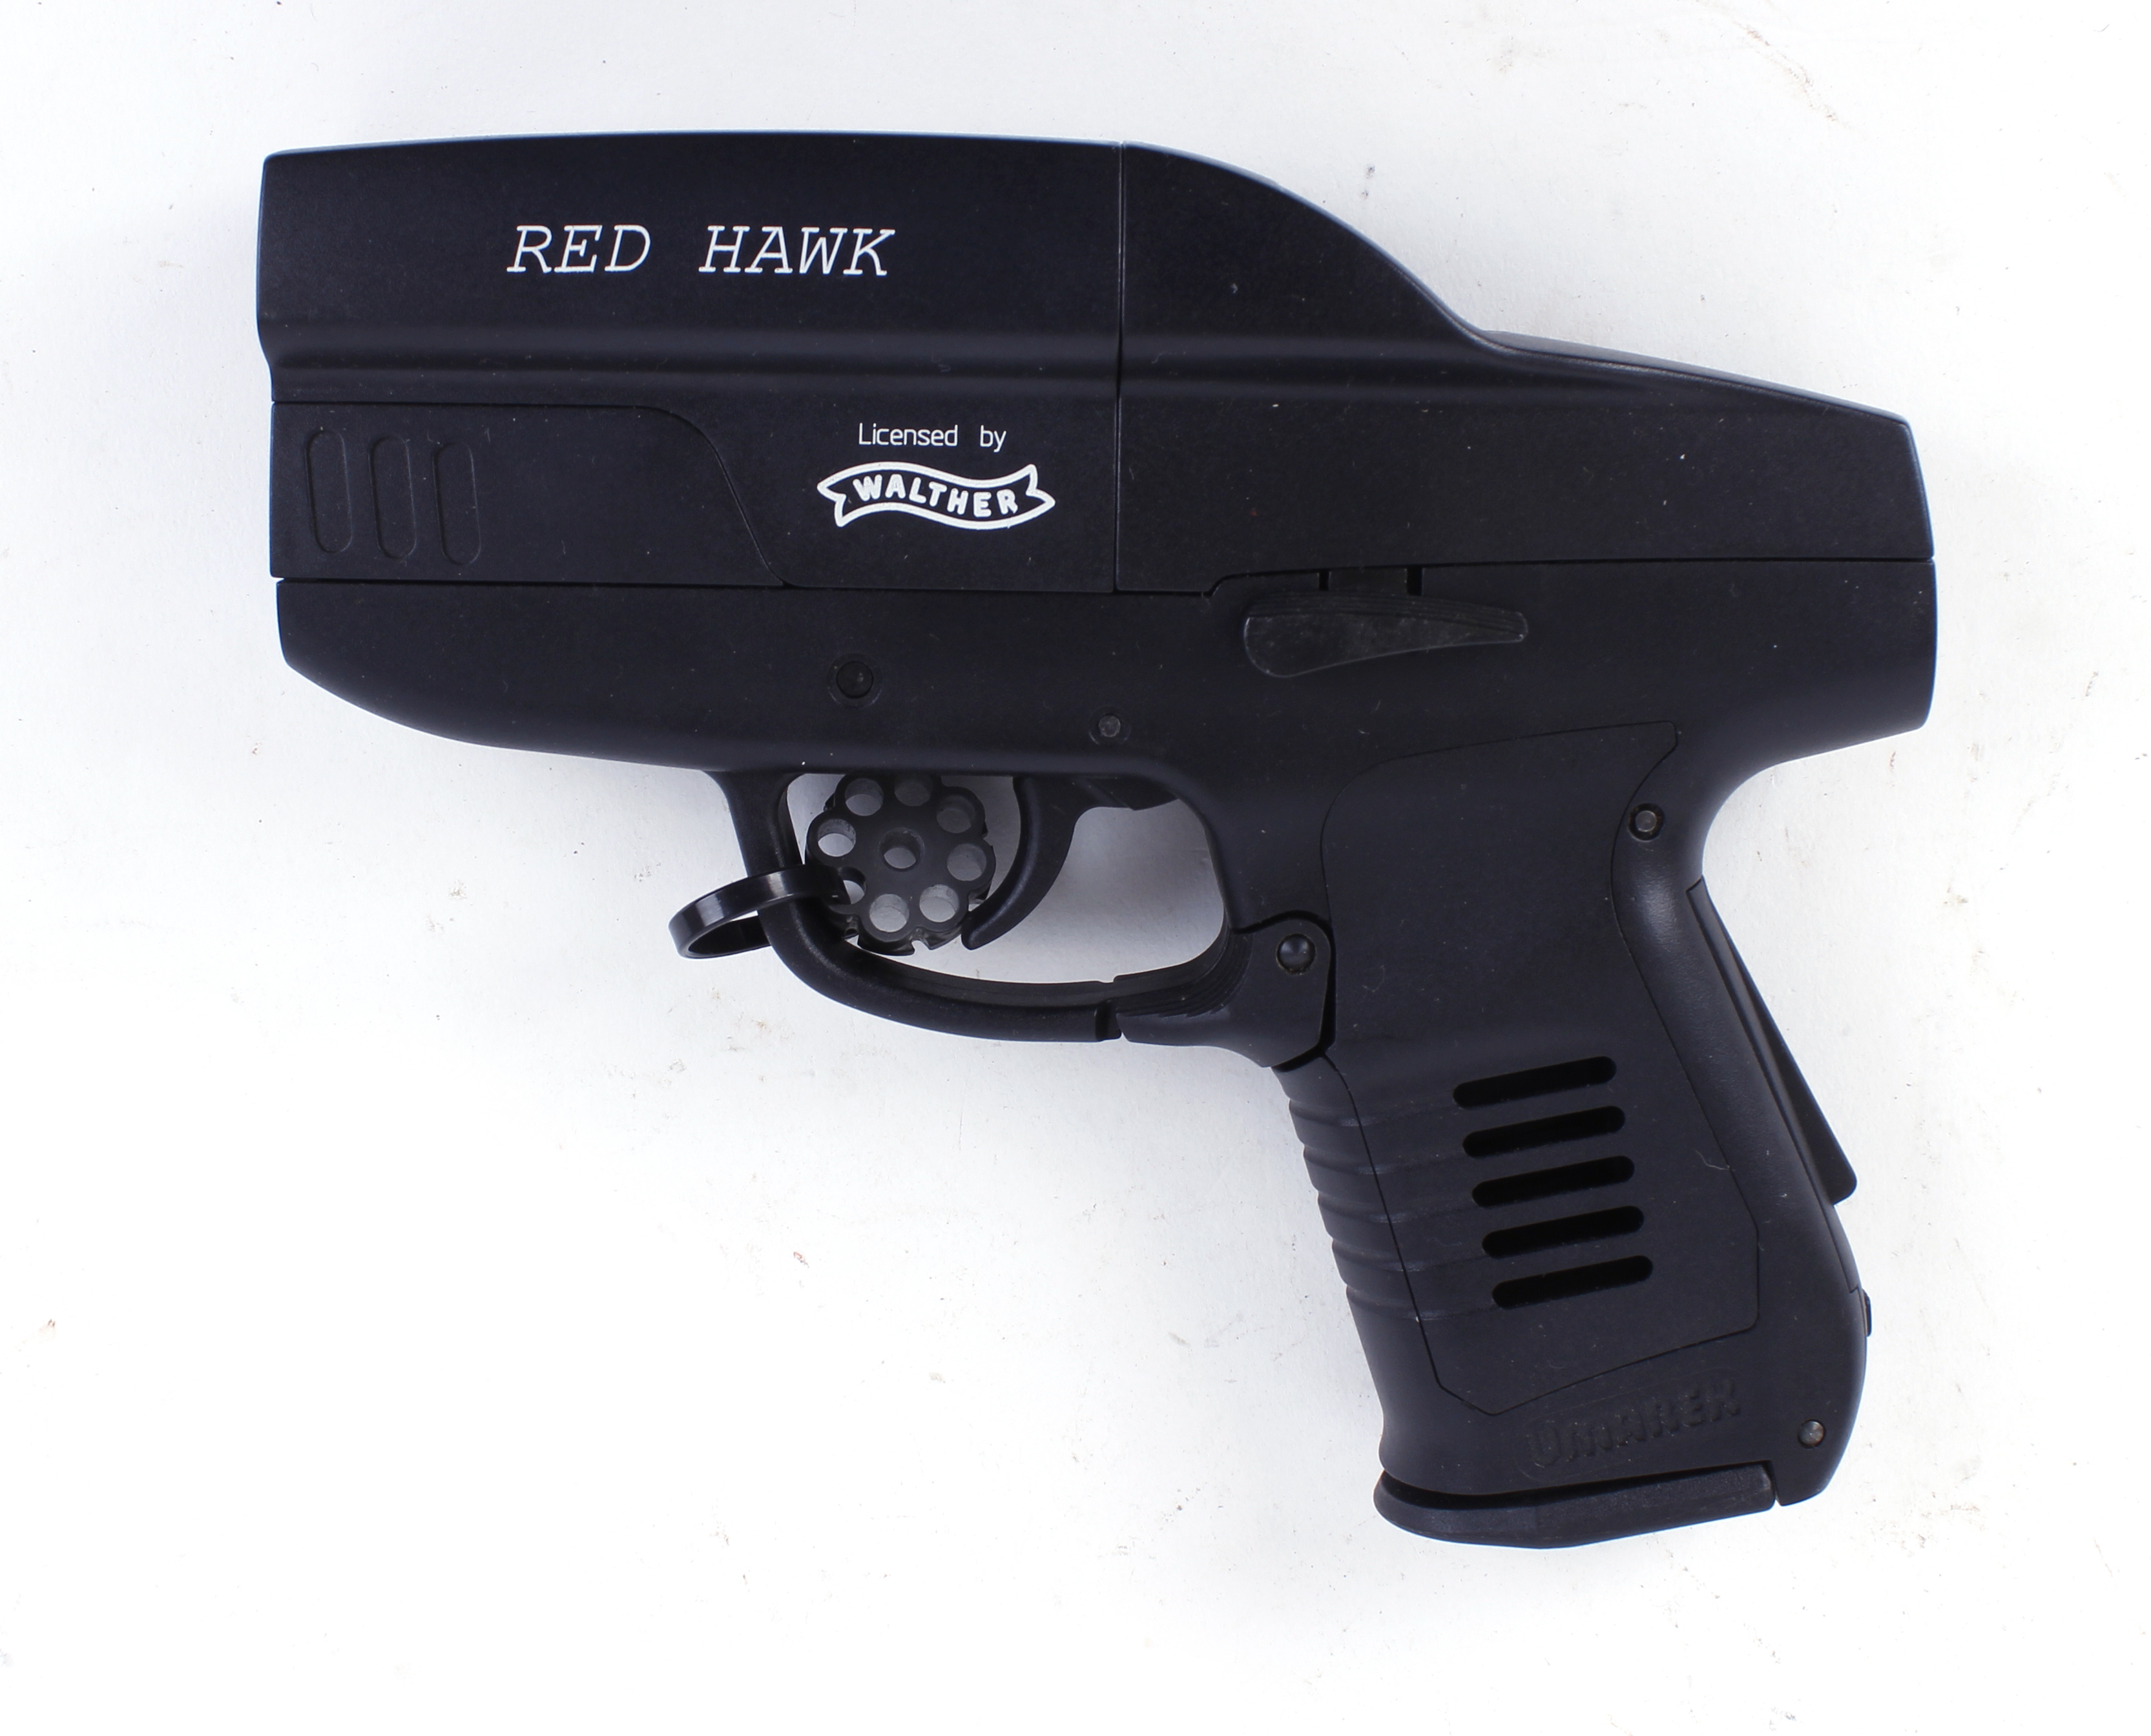 .177 Walther (Umarex) Red Hawk Co2 air pistol, 8 shot rotary magazine, no. J41000788